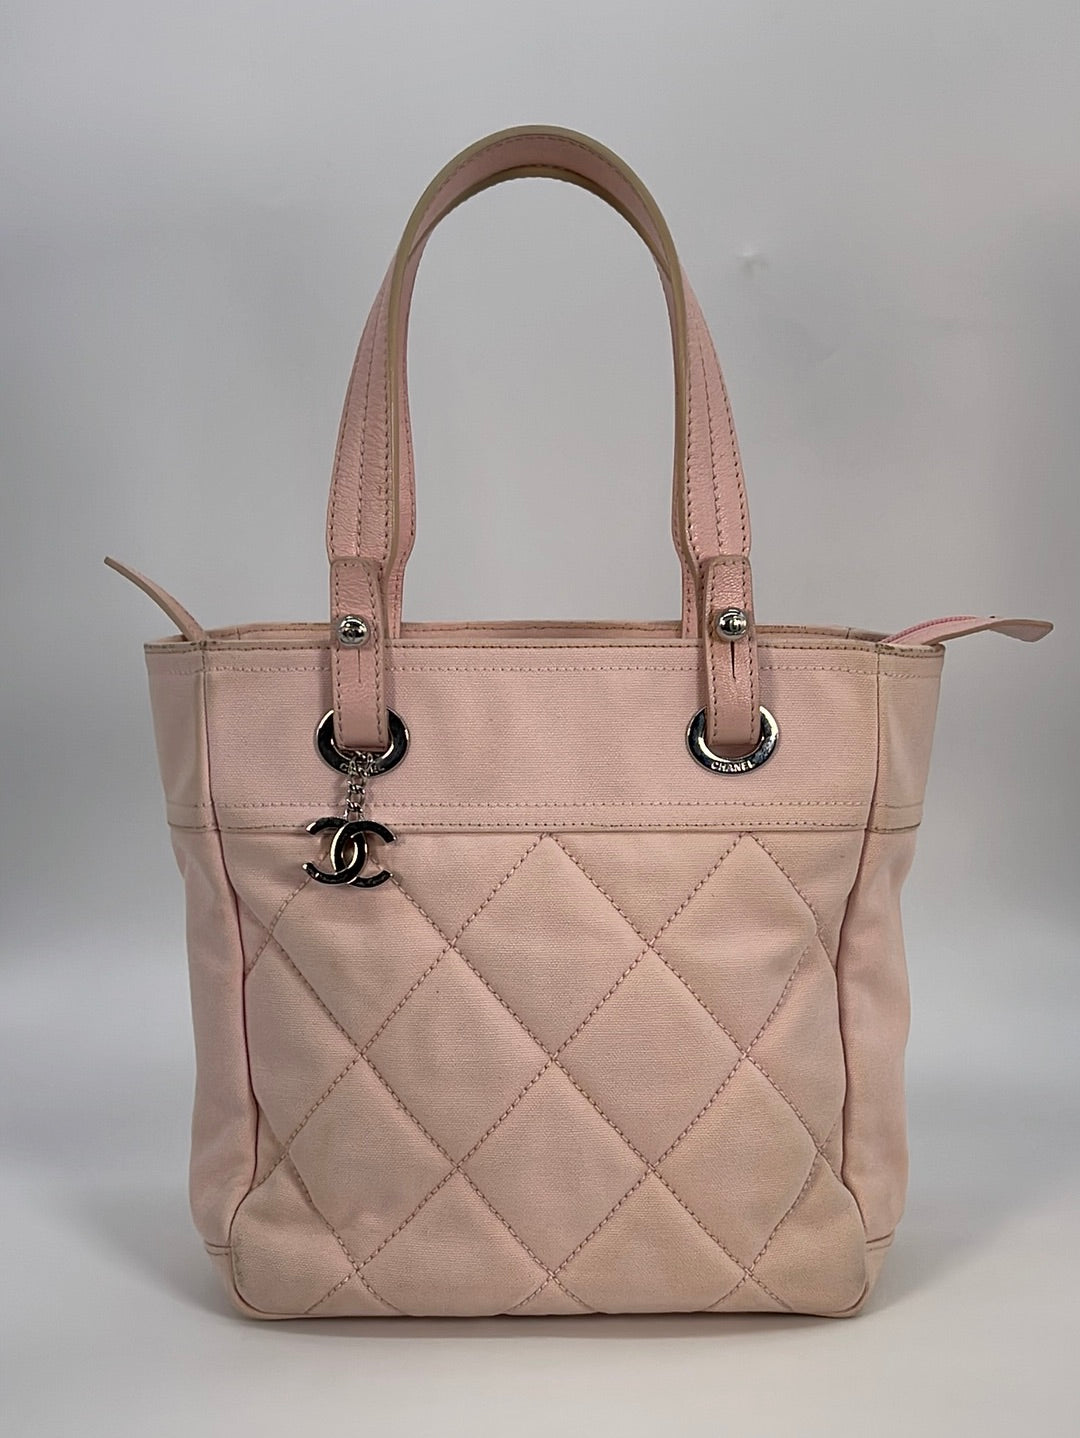 Preloved Chanel Pink Quilted Canvas Biarritz Soft Tote 12586392 012322 –  KimmieBBags LLC